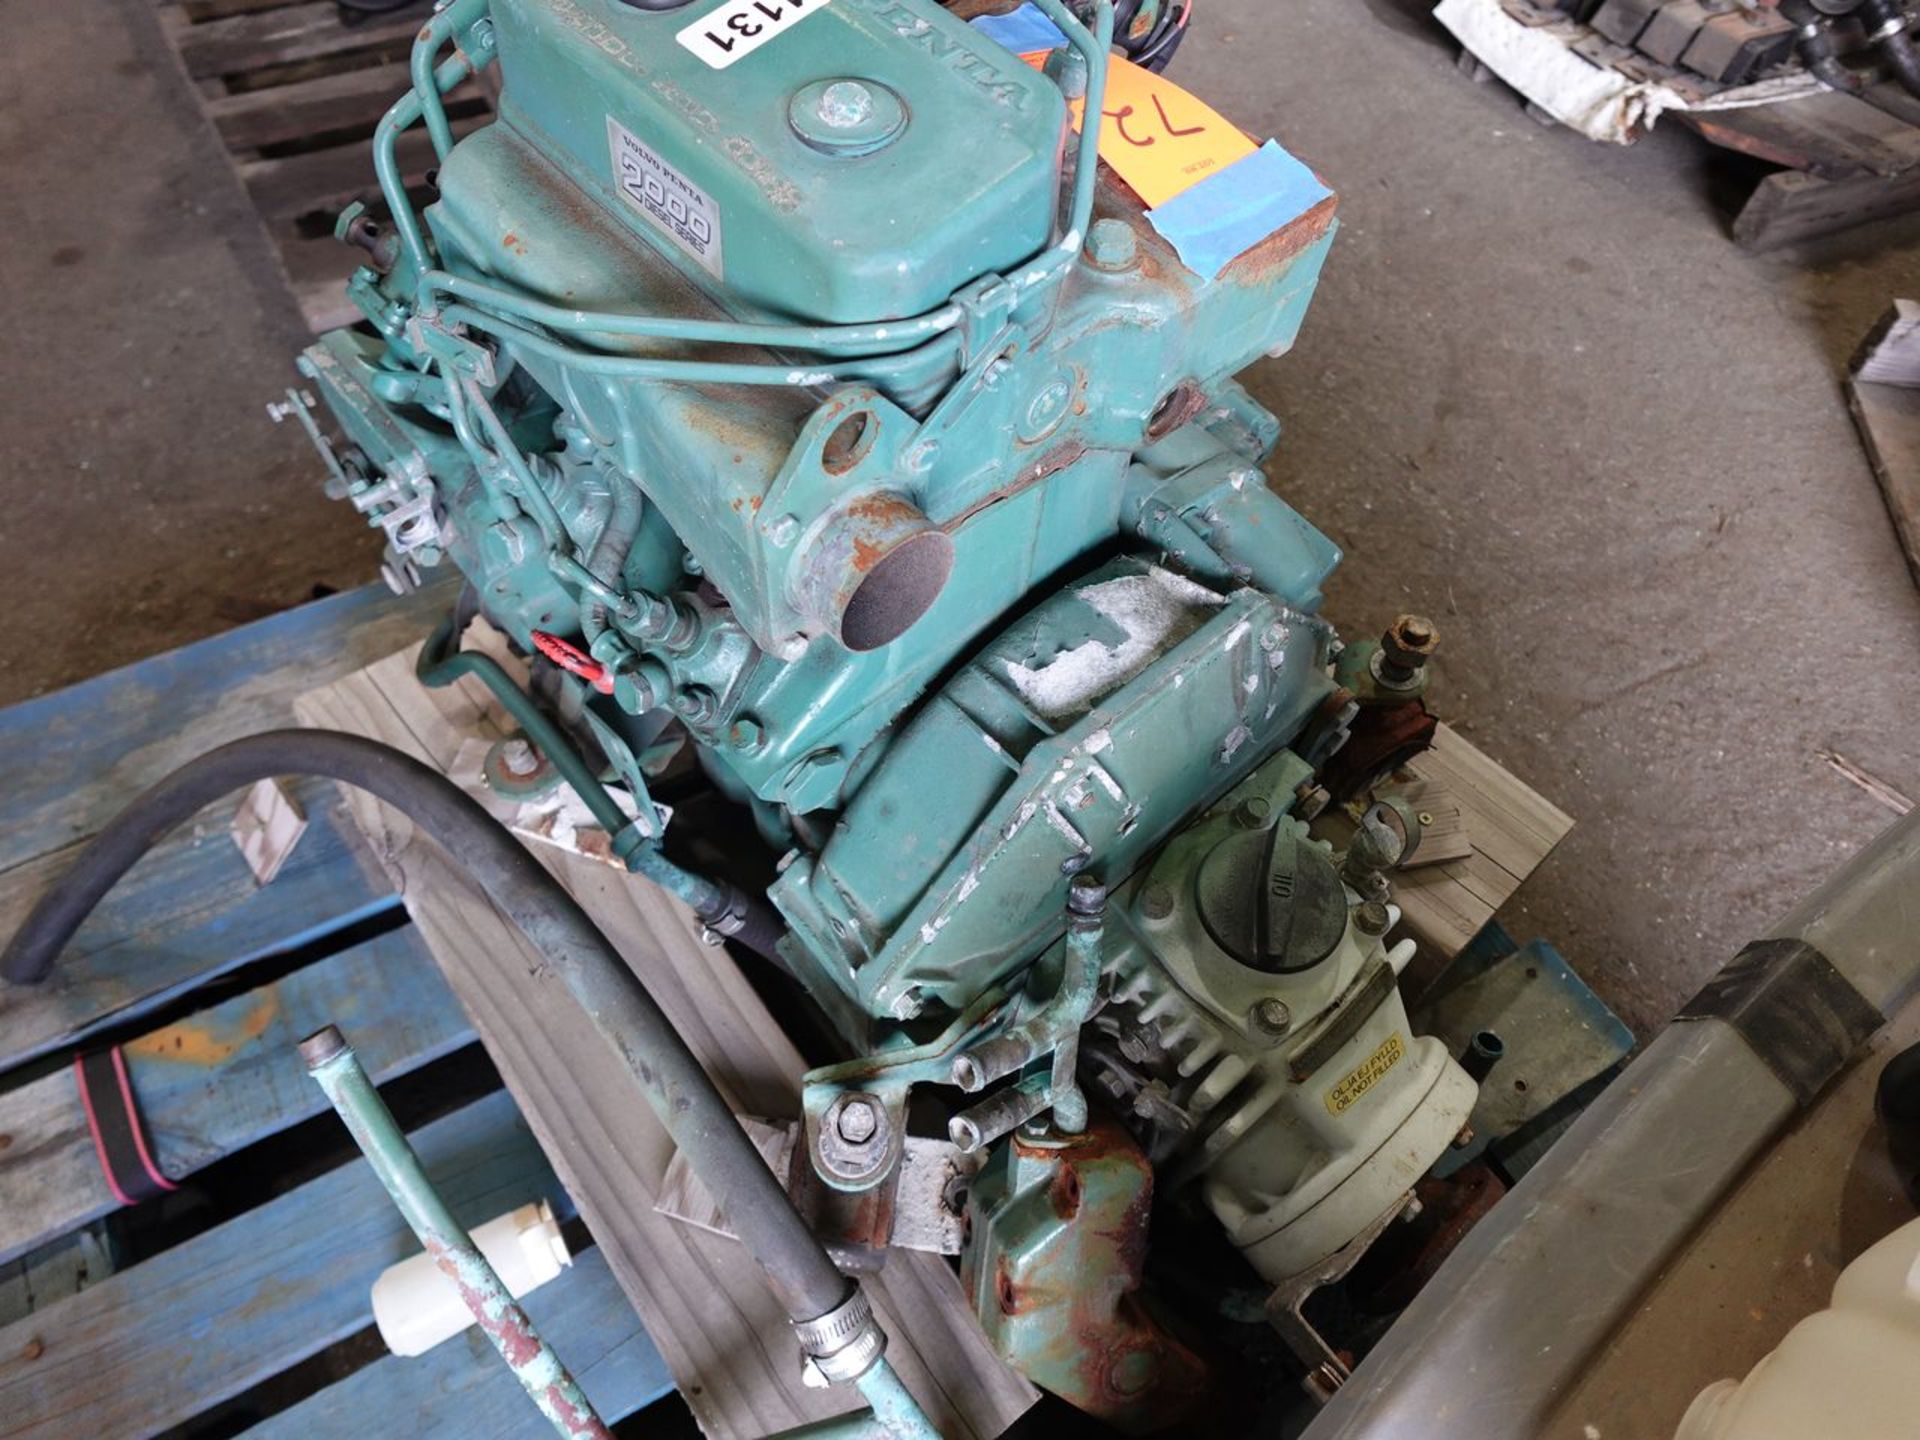 Volvo 2002 Engine, S/N: FL 4073; with Model MS-2B Transmission S/N: 14360, 3.71:1 Ratio (Client - Image 3 of 4